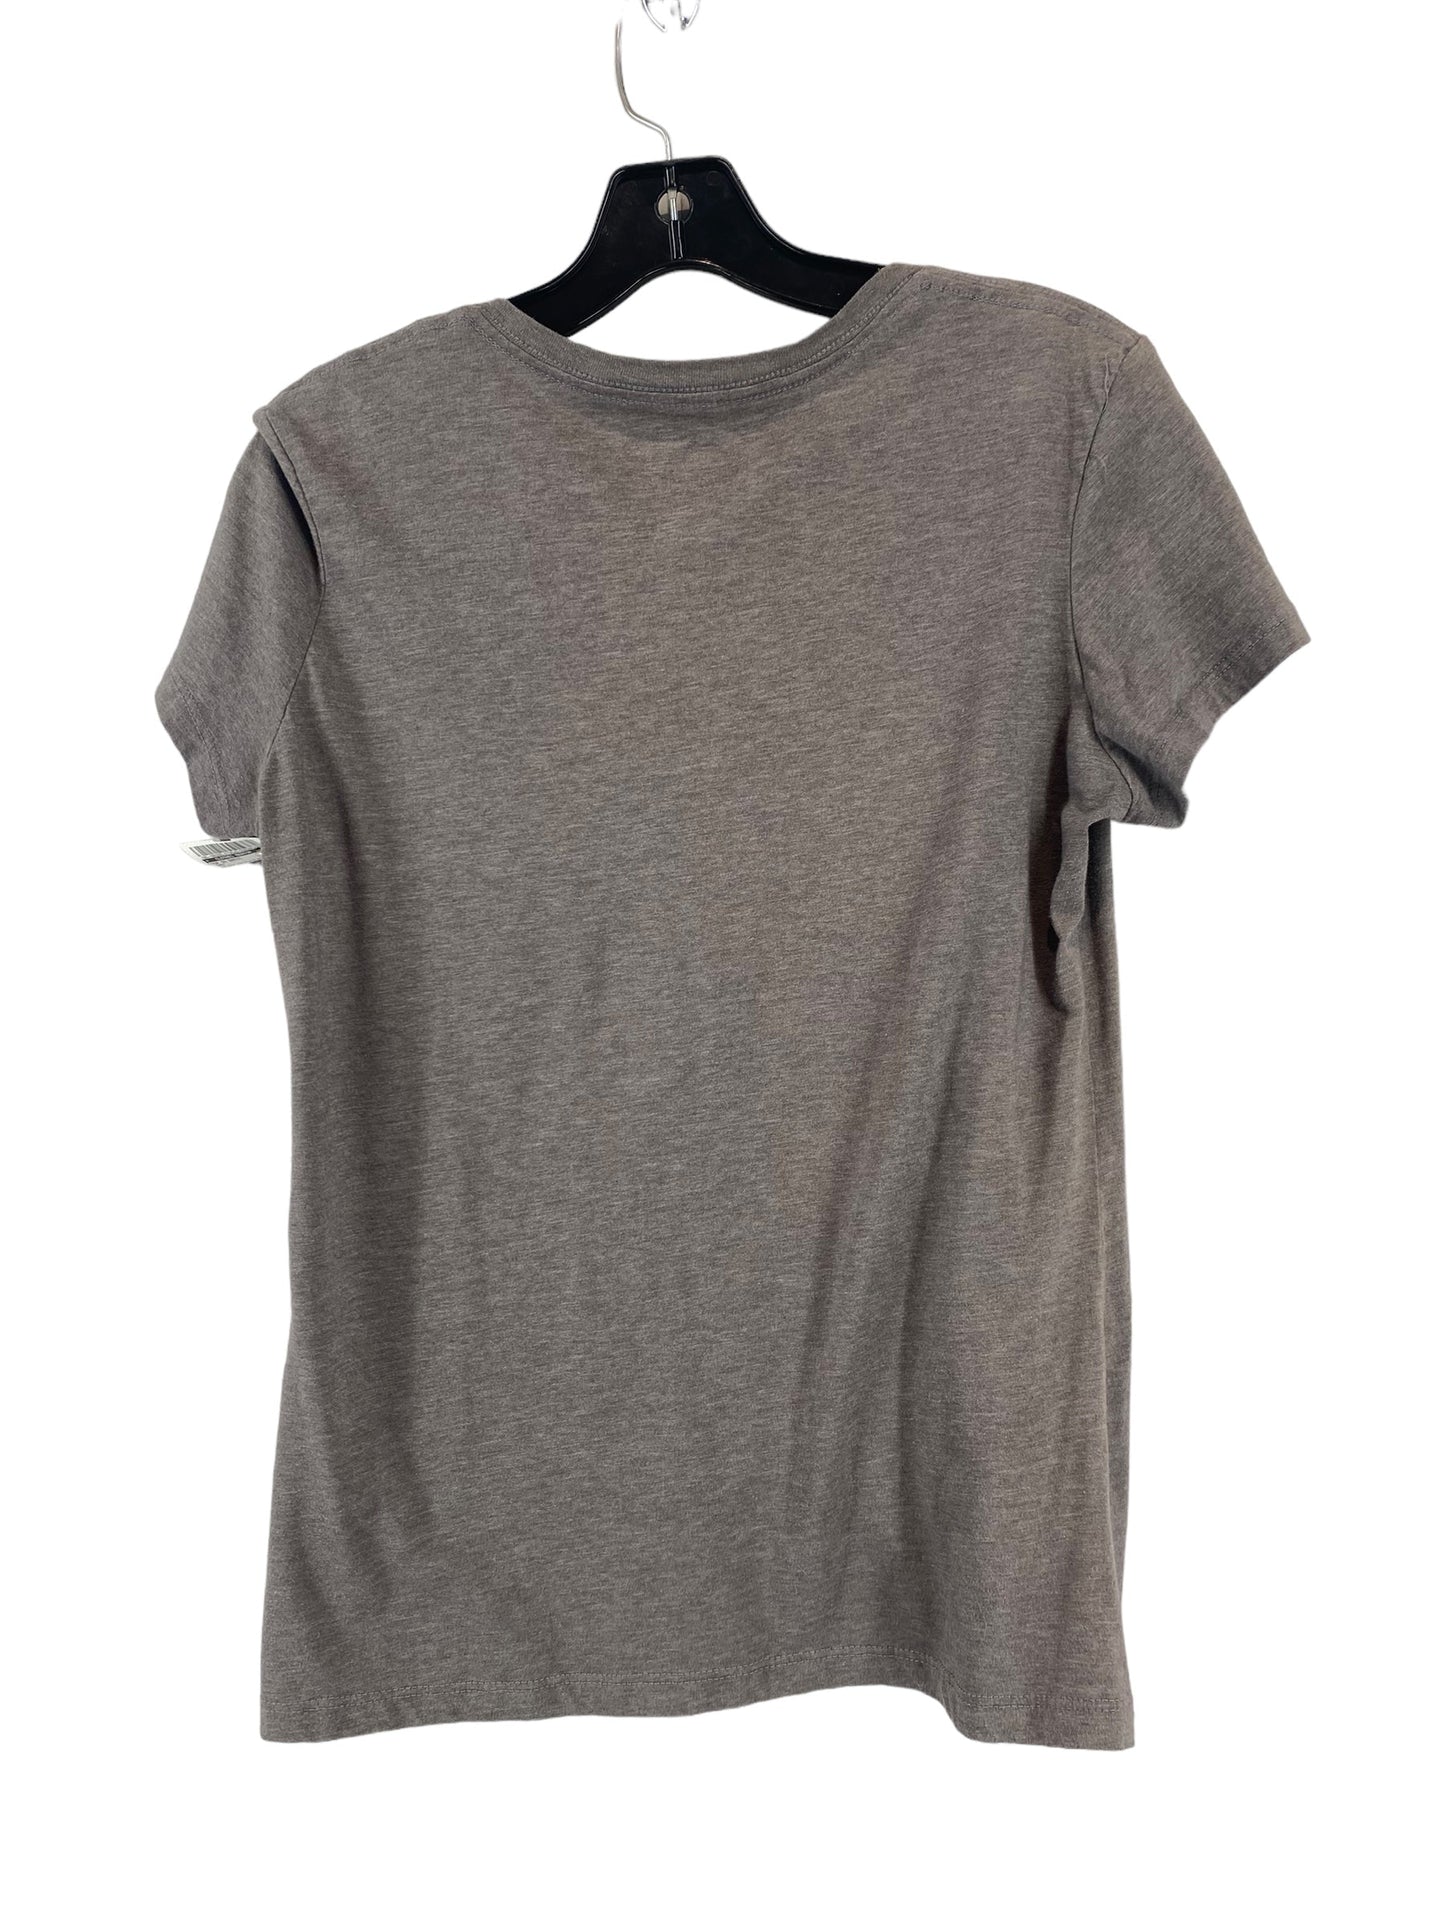 Grey Top Short Sleeve Basic Clothes Mentor, Size L